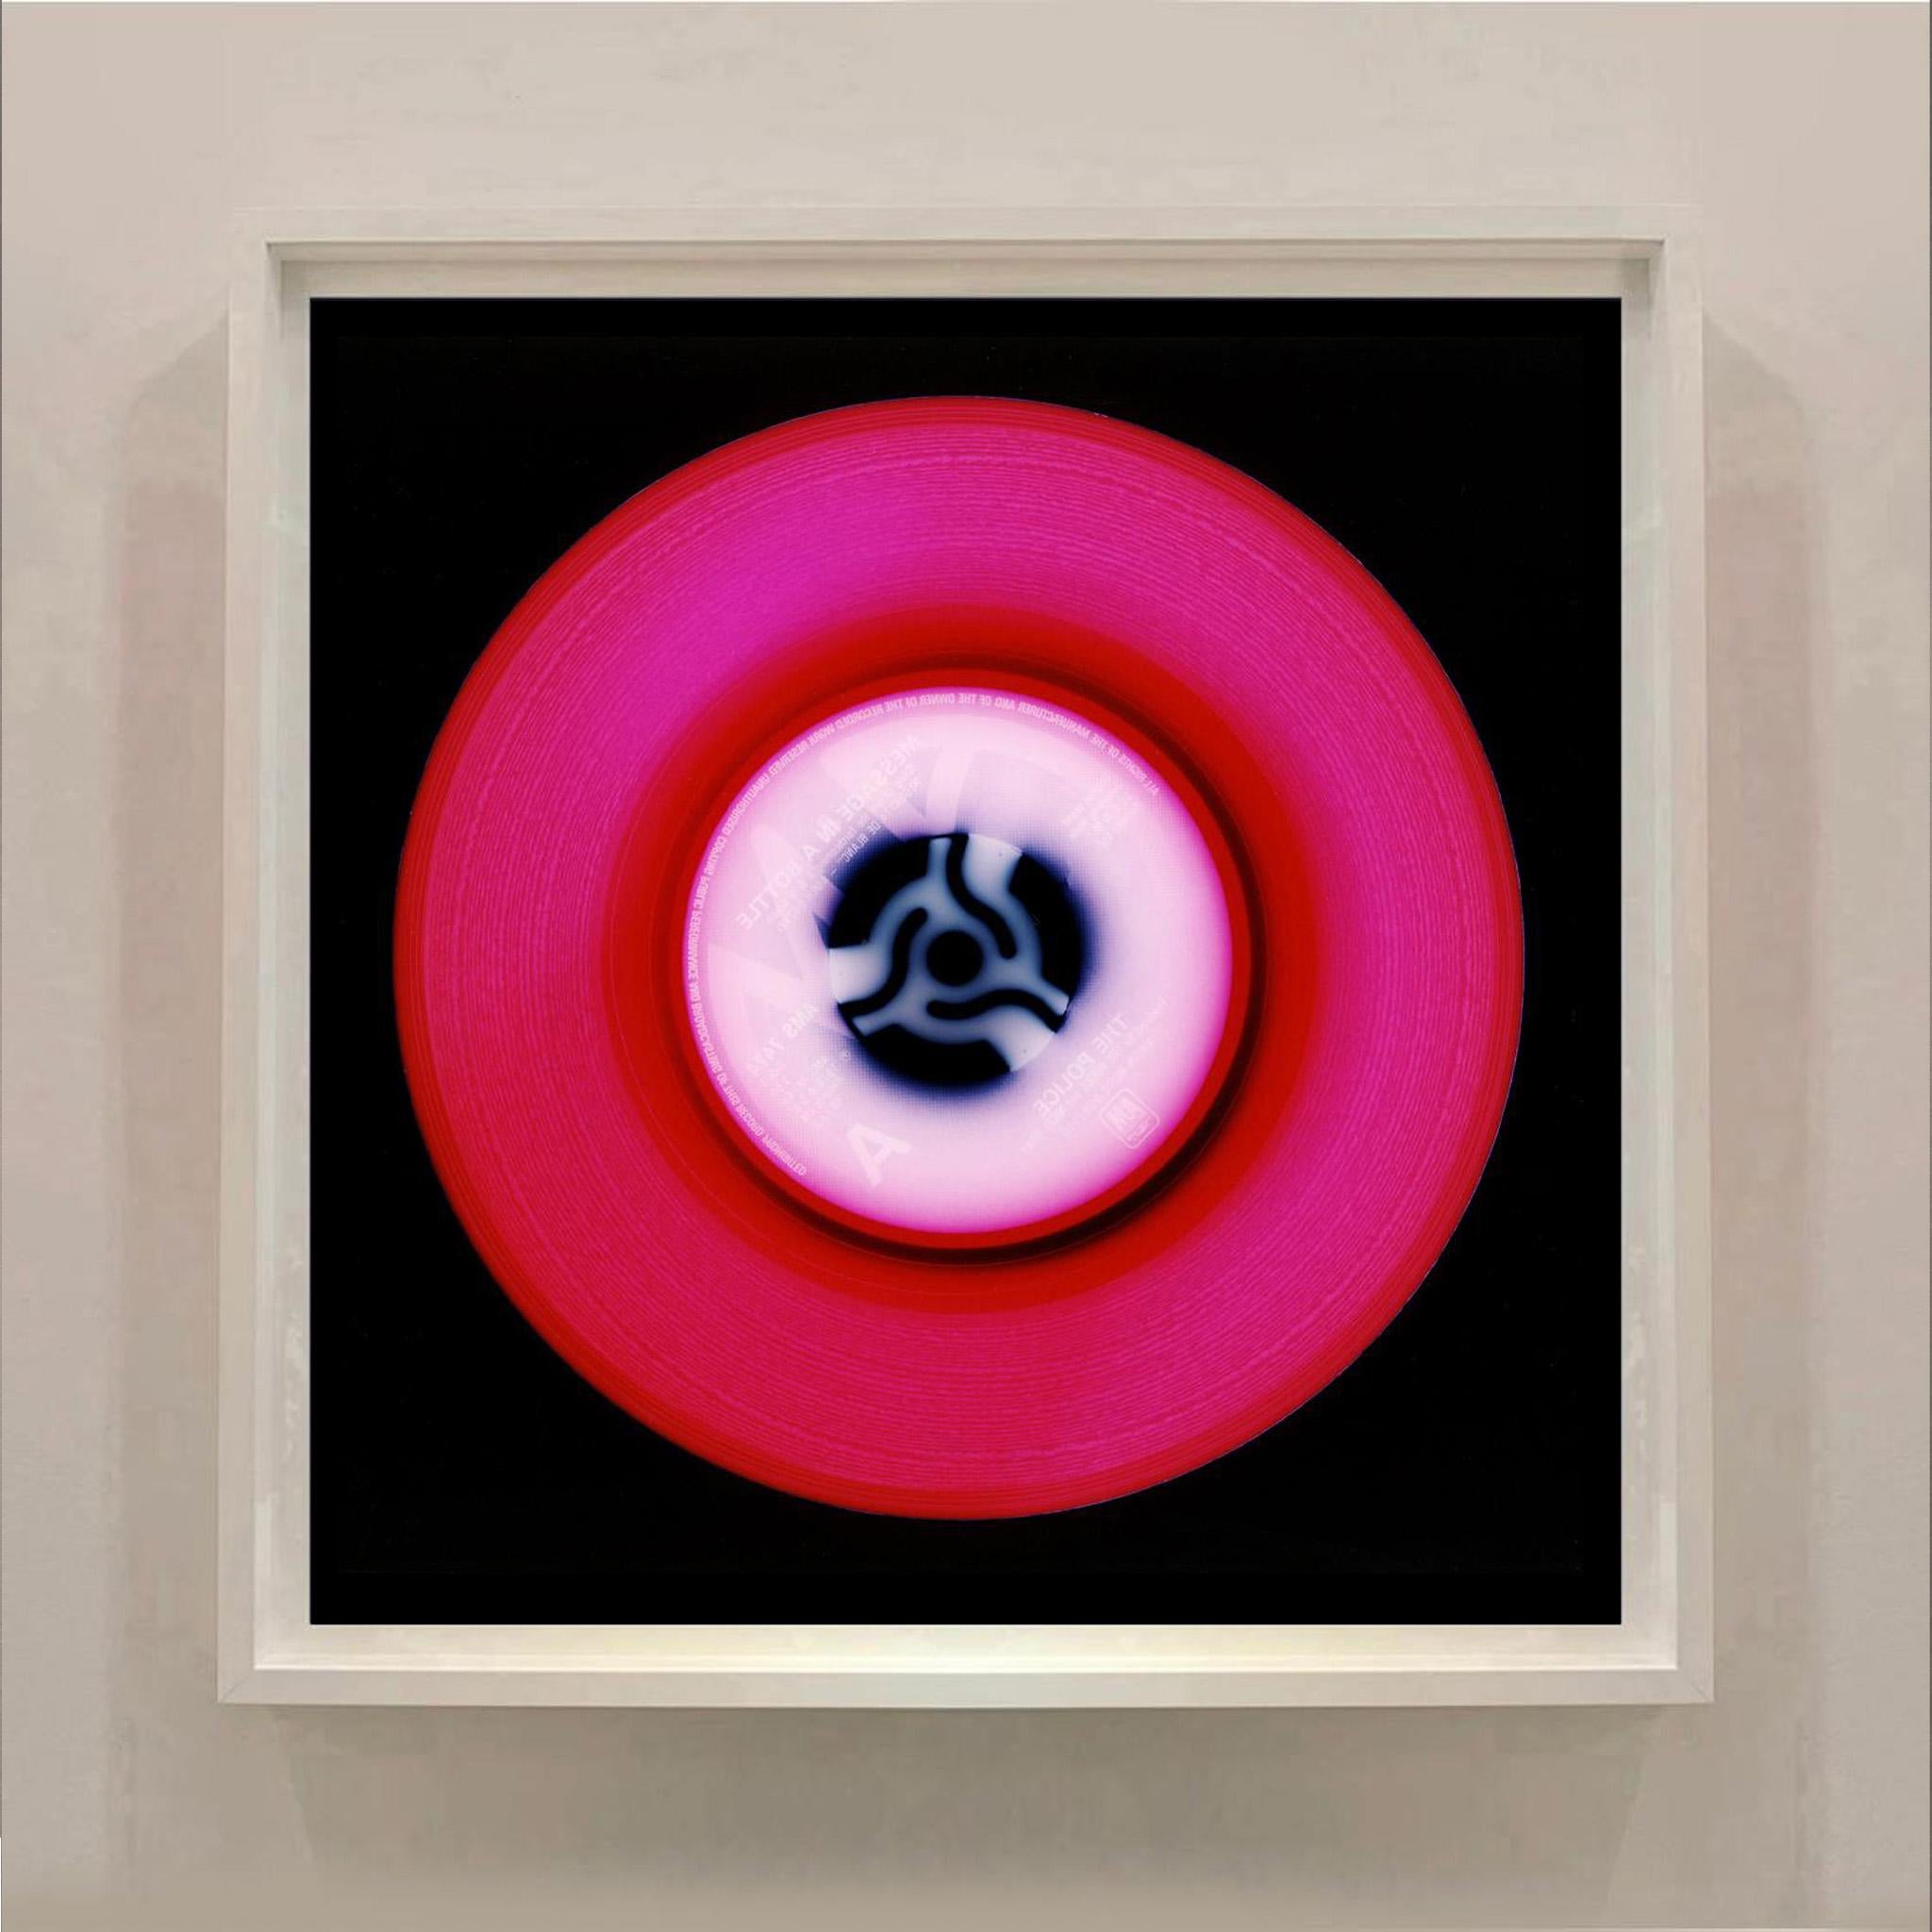 A (Hot Pink) from the Heidler and Heeps Vinyl Collection.
Acclaimed contemporary photographers, Richard Heeps and Natasha Heidler have collaborated to make this beautifully mesmerising collection. A celebration of the vinyl record and analogue